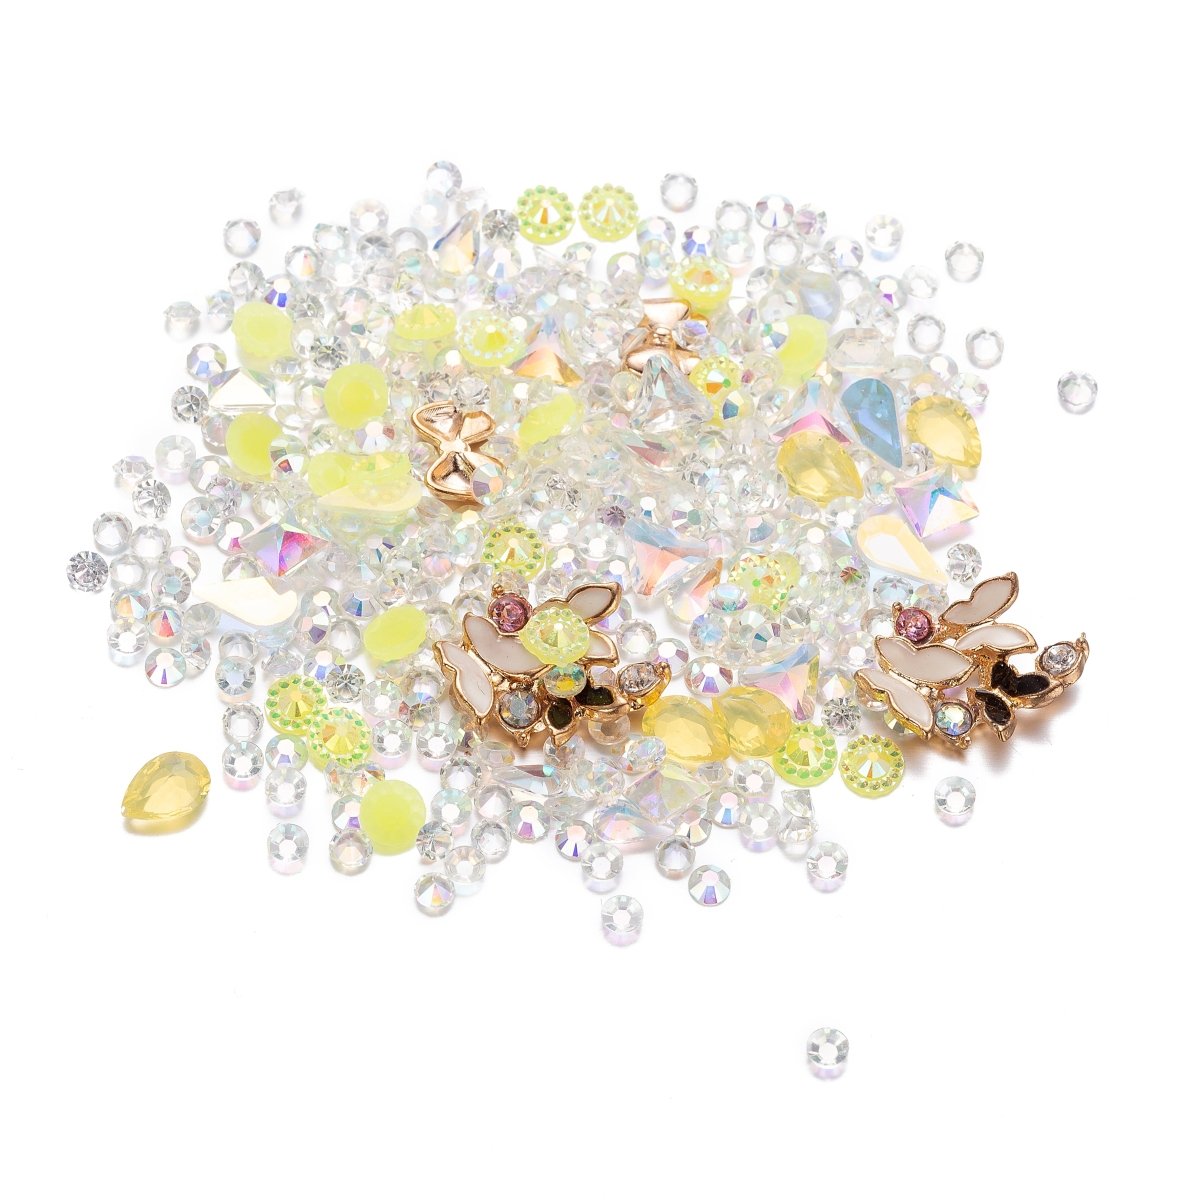 Mixed Crystal - Crystal AB, Yellow Crystal and Butterfly Nail Art DÃ©cor - DLUXCA